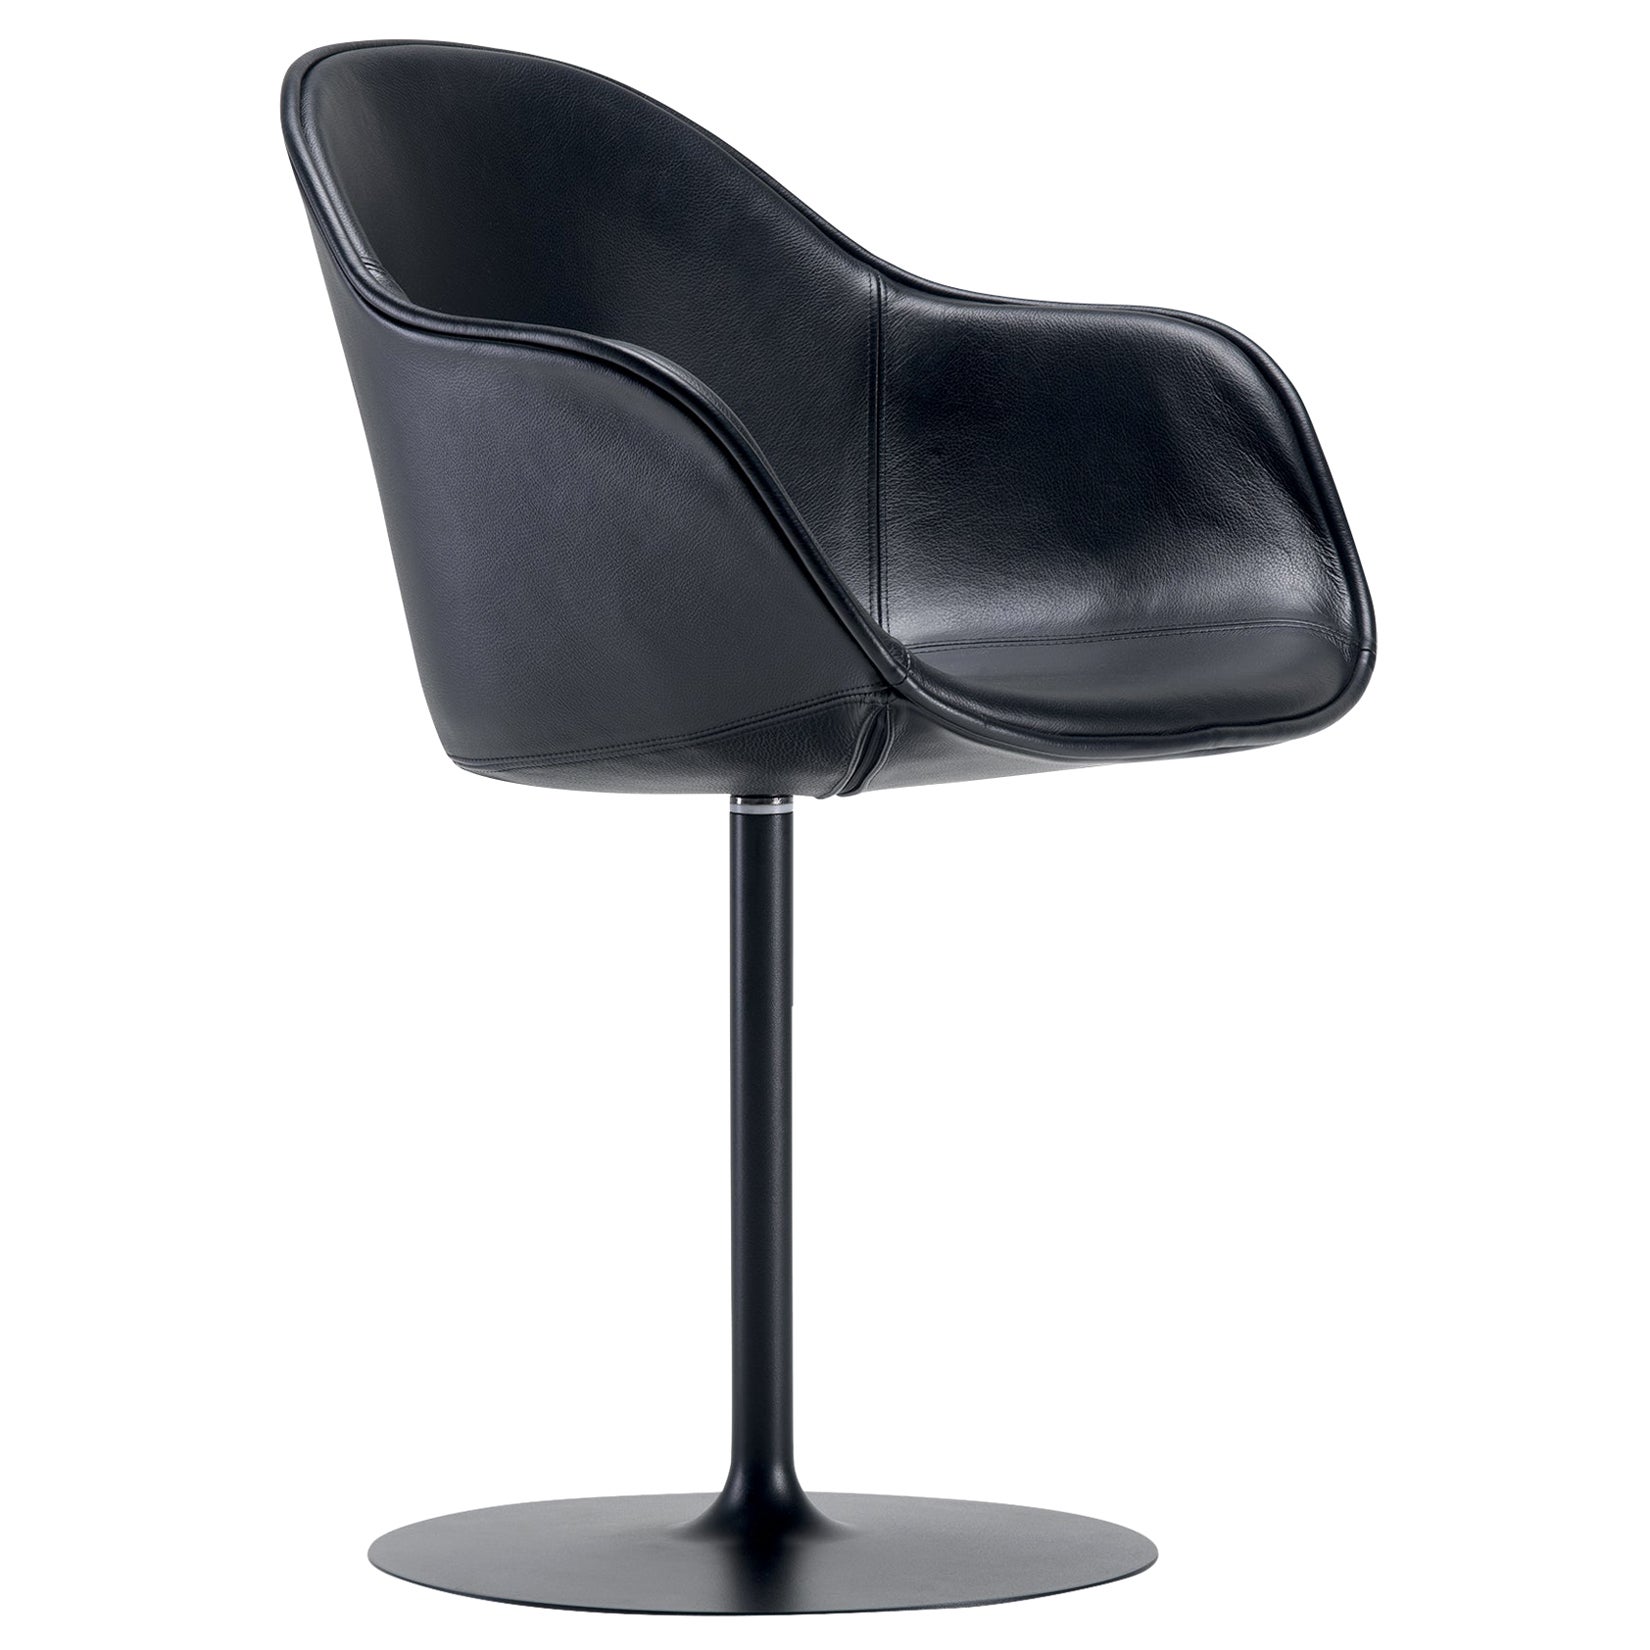 Alias 07G New Lady Soft Calyx Chair in Black Leather Seat &Lacquered Steel Frame